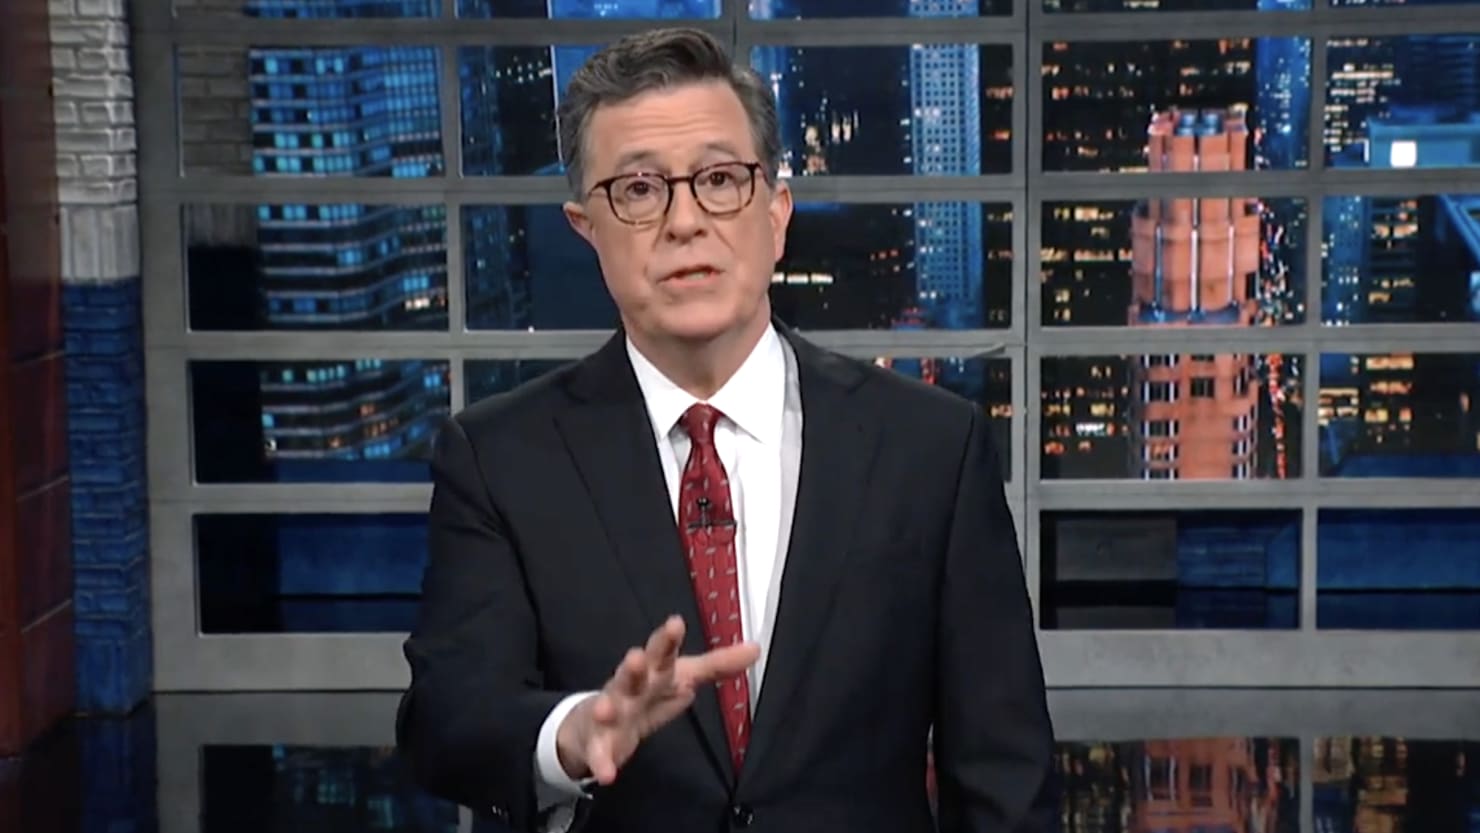 Colbert broke up with a GOP agent who compared the school to World War II.